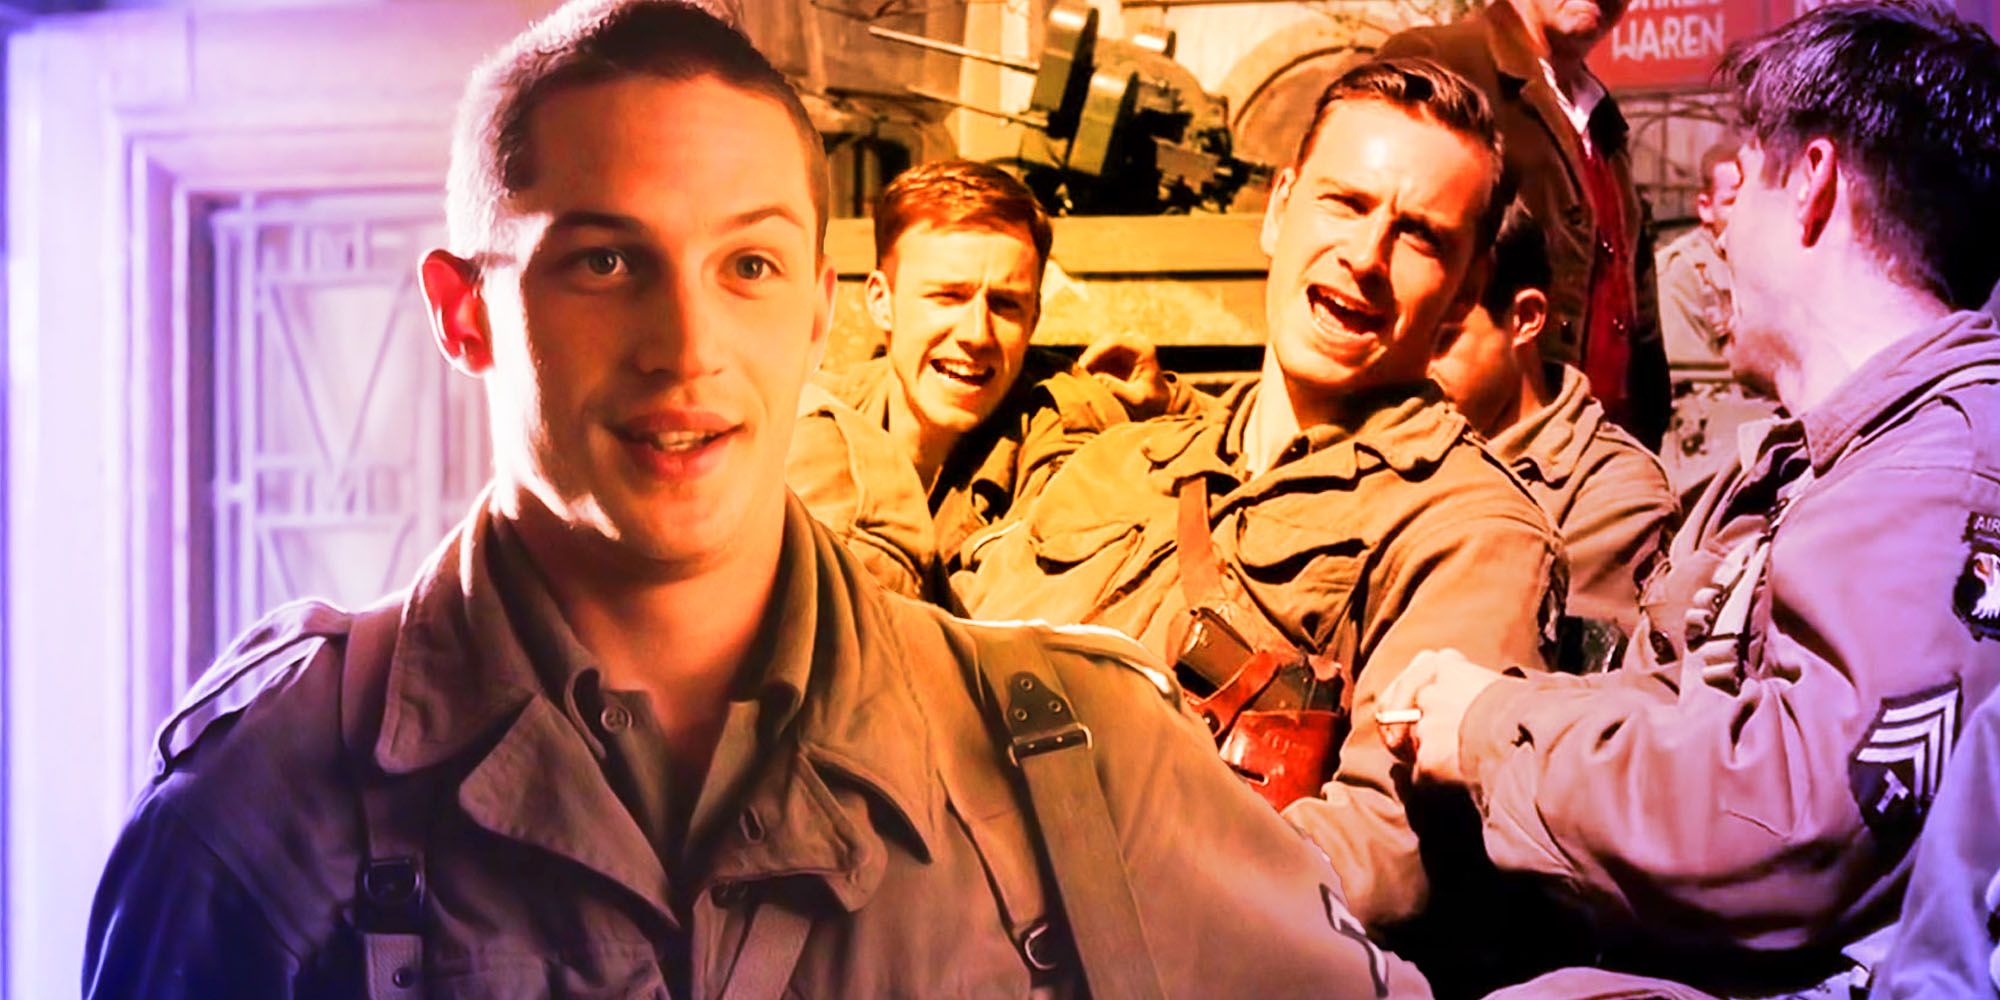 Blended, colorful image of Tom Hardy smiling and Michael Fassbender celebrating with fellow soldiers in Band of Brothers